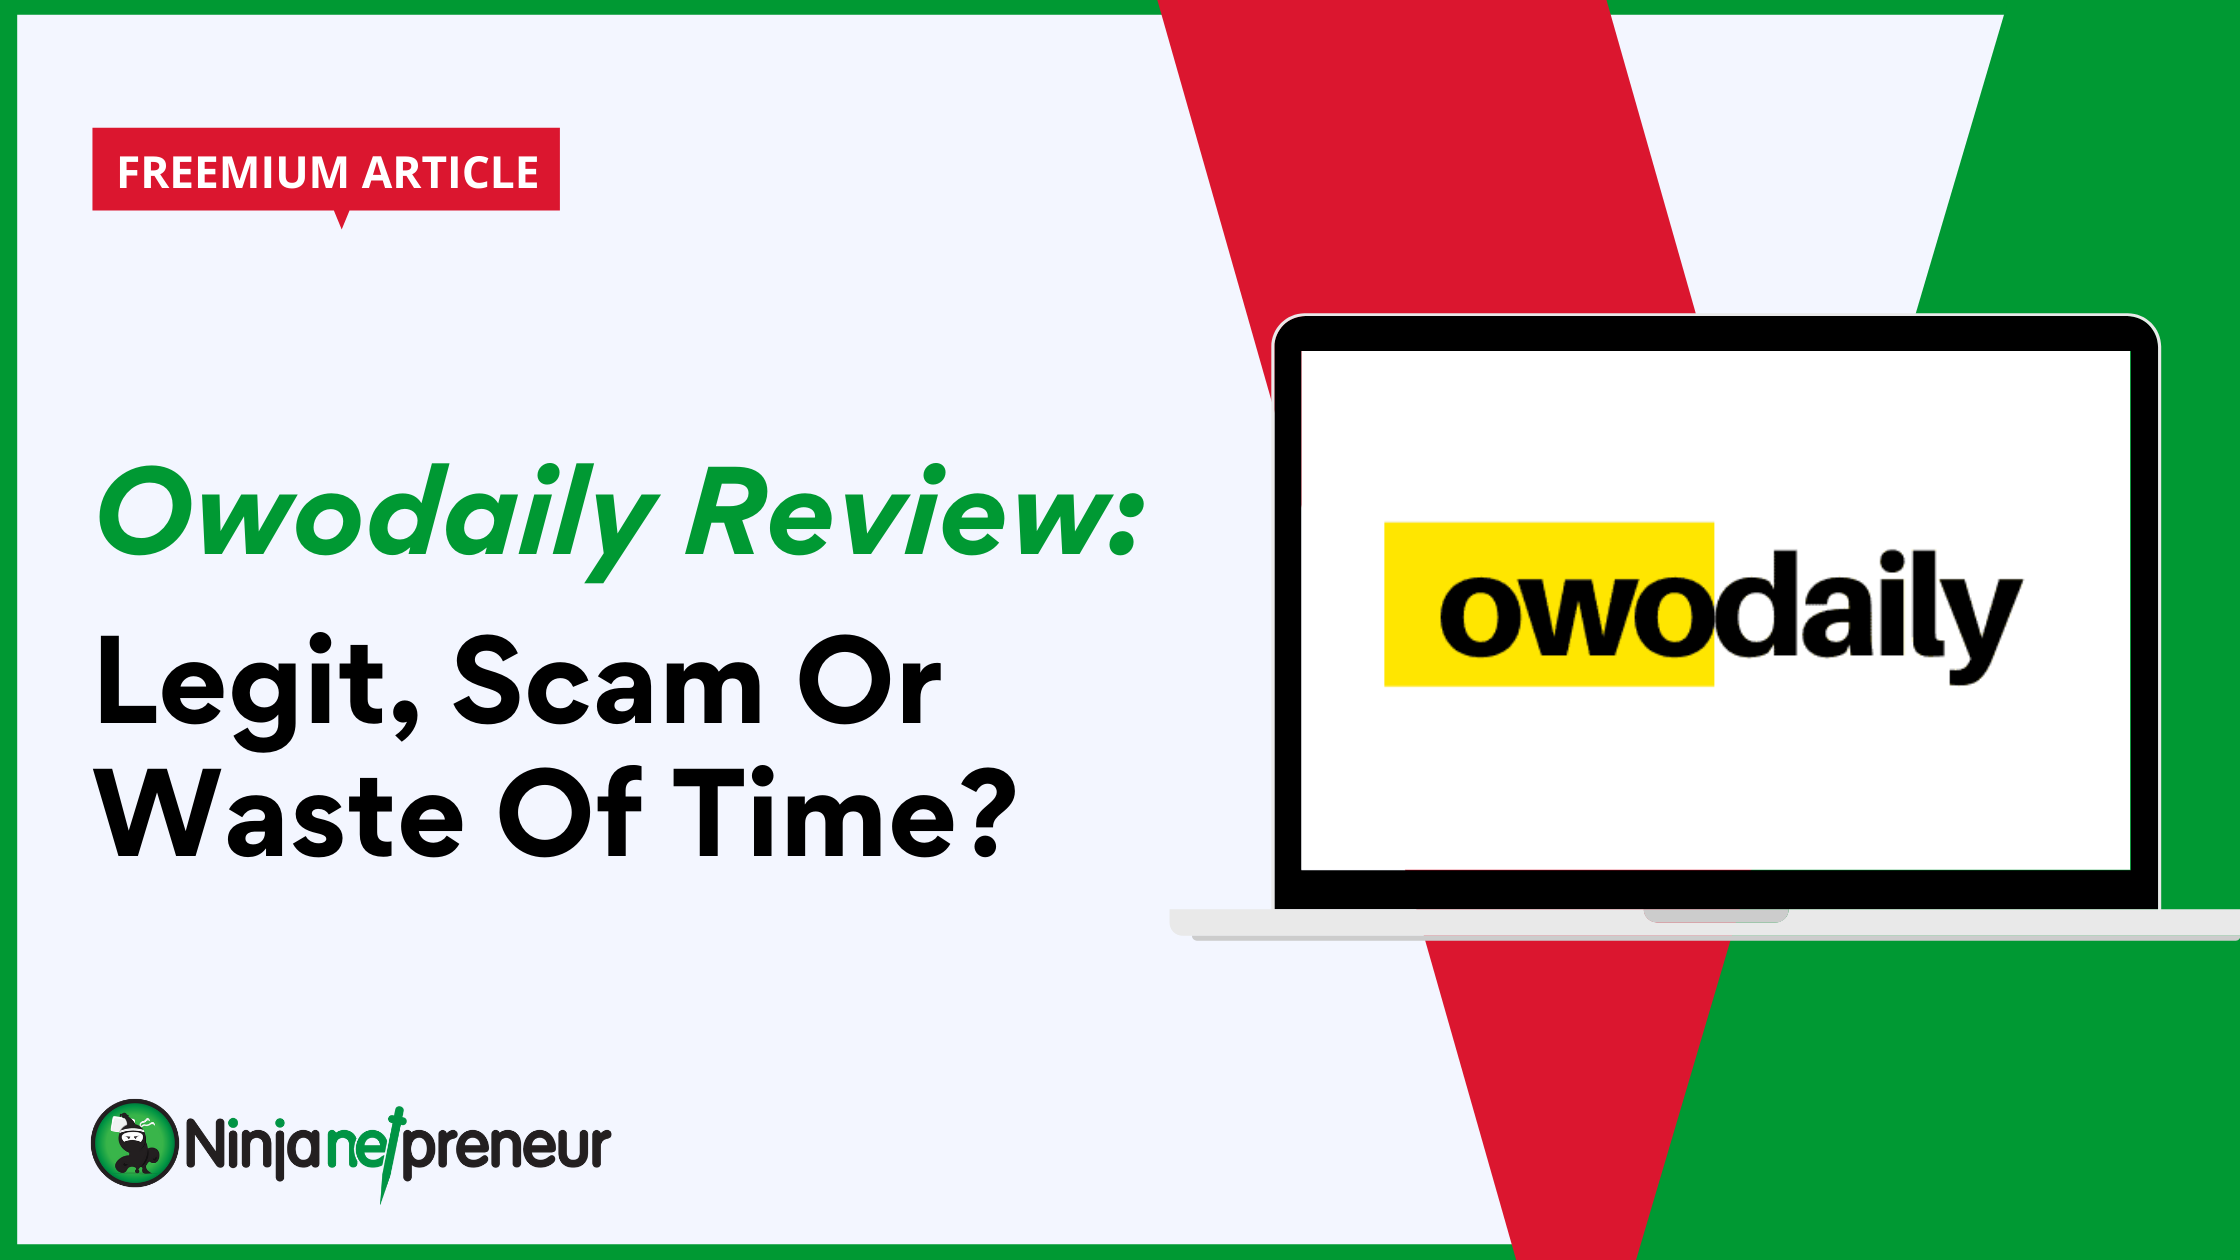 owodaily review - Legit, Scam Or Waste Of Time